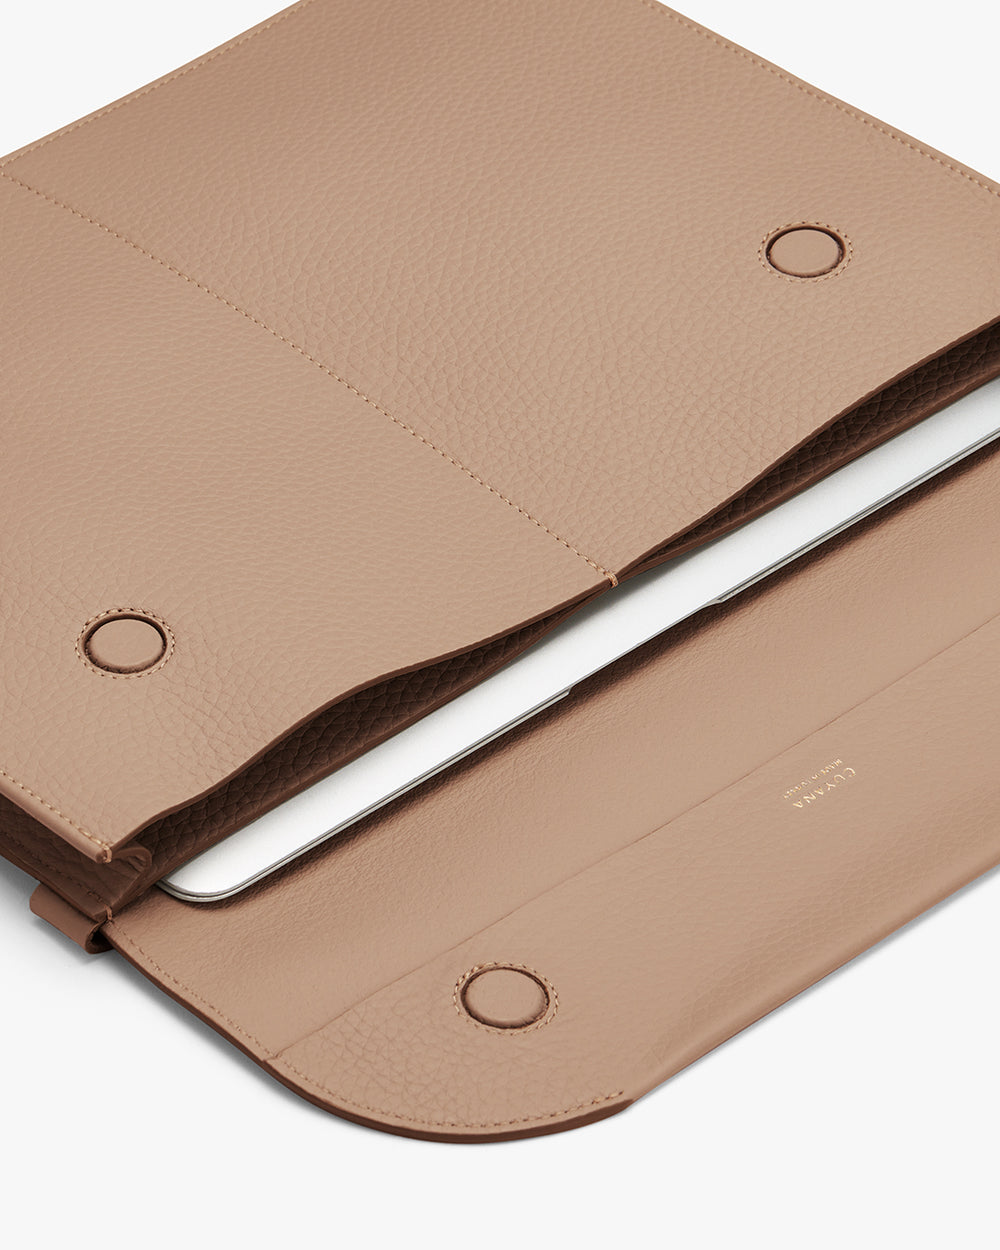 Laptop in an open sleeve with a snap closure.